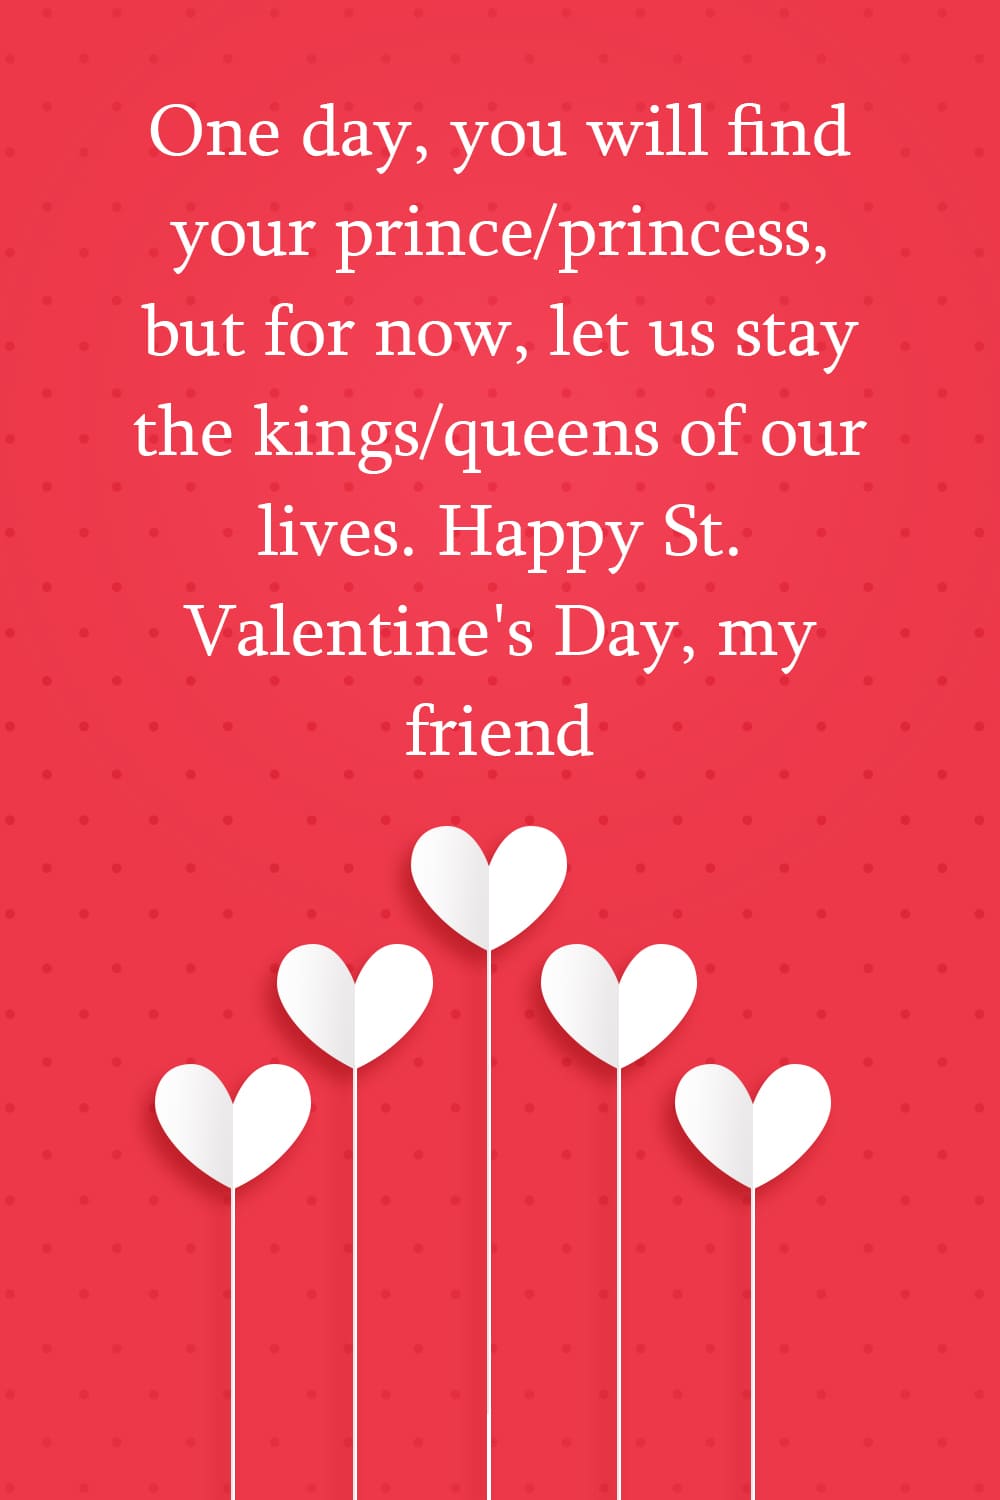 One day, you will find your prince/princess, but for now, let us stay the kings/queens of our lives. Happy St. Valentine's Day, my friend.